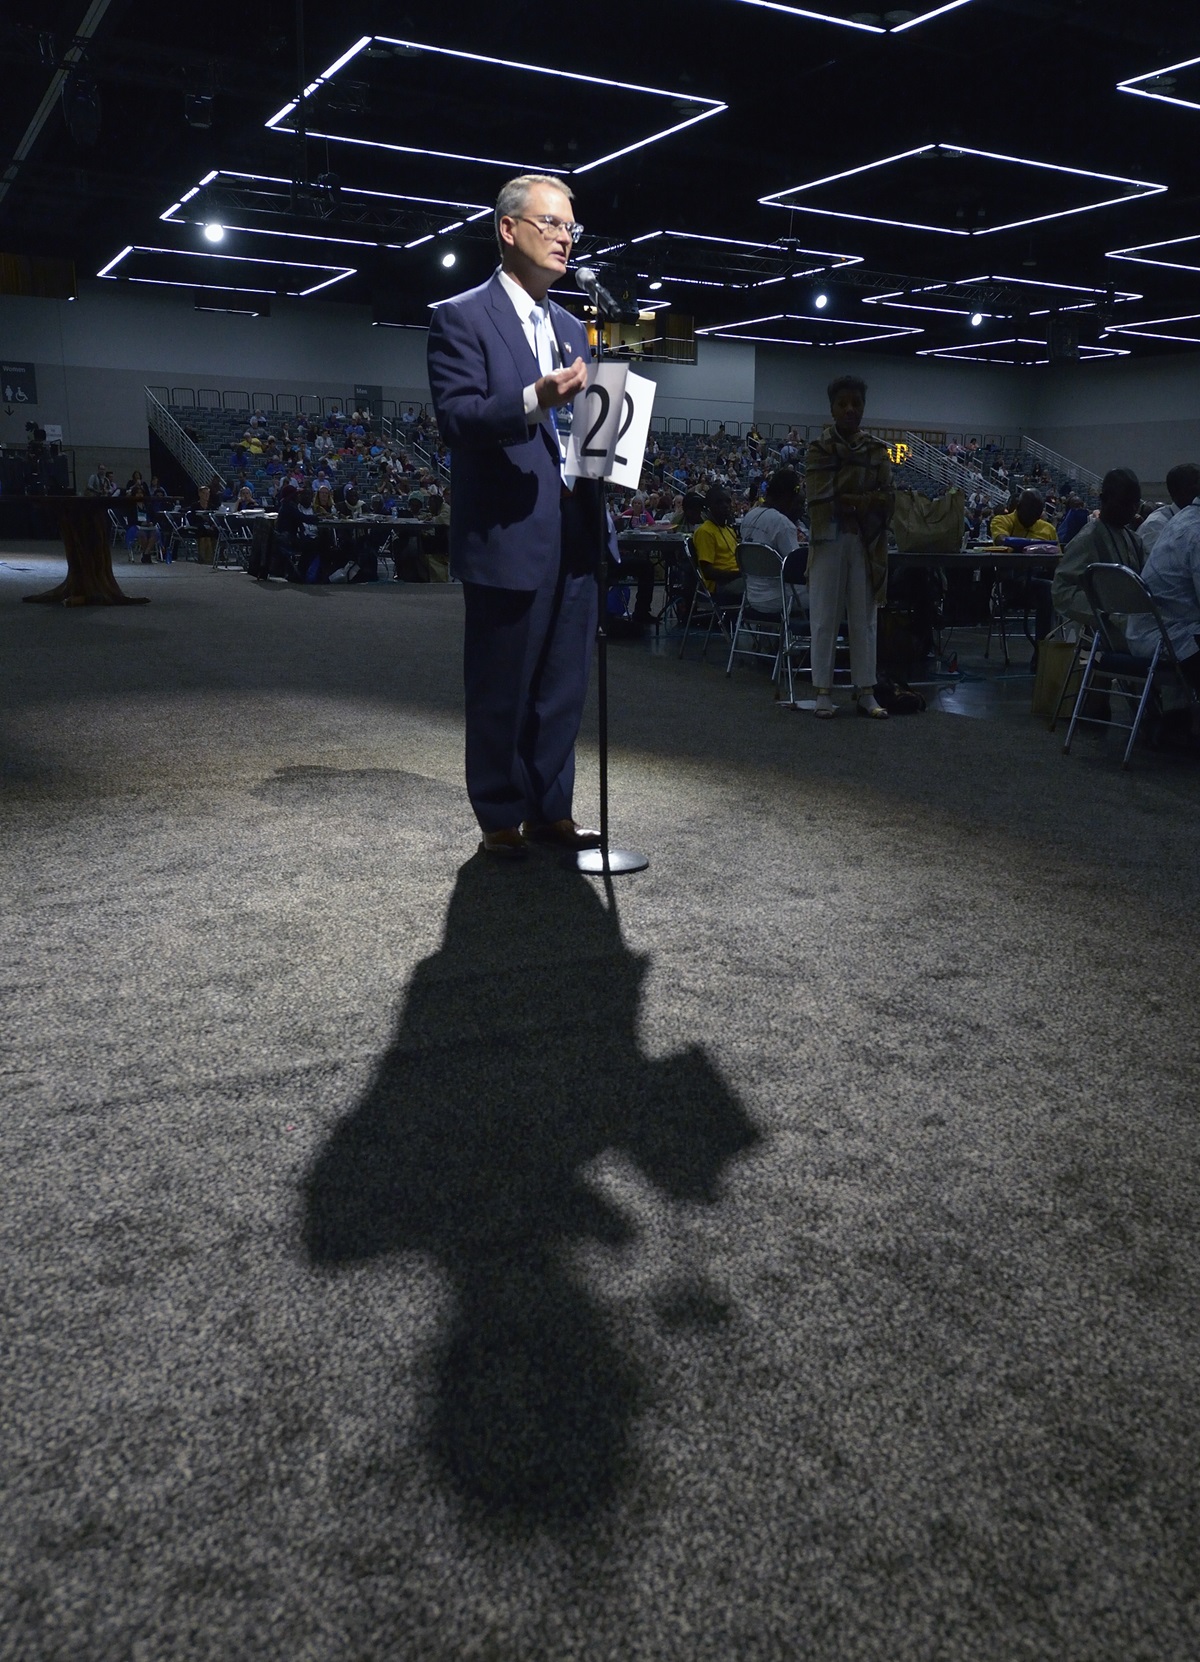 The Rev. Adam Hamilton, a clergy delegate from the Great Plains Conference, speaks on the floor of the 2016 United Methodist General Conference in Portland, Ore. Delegates were discussing what some perceive as a need to divide the denomination over issues of sexuality. Photo by Paul Jeffrey, UMNS